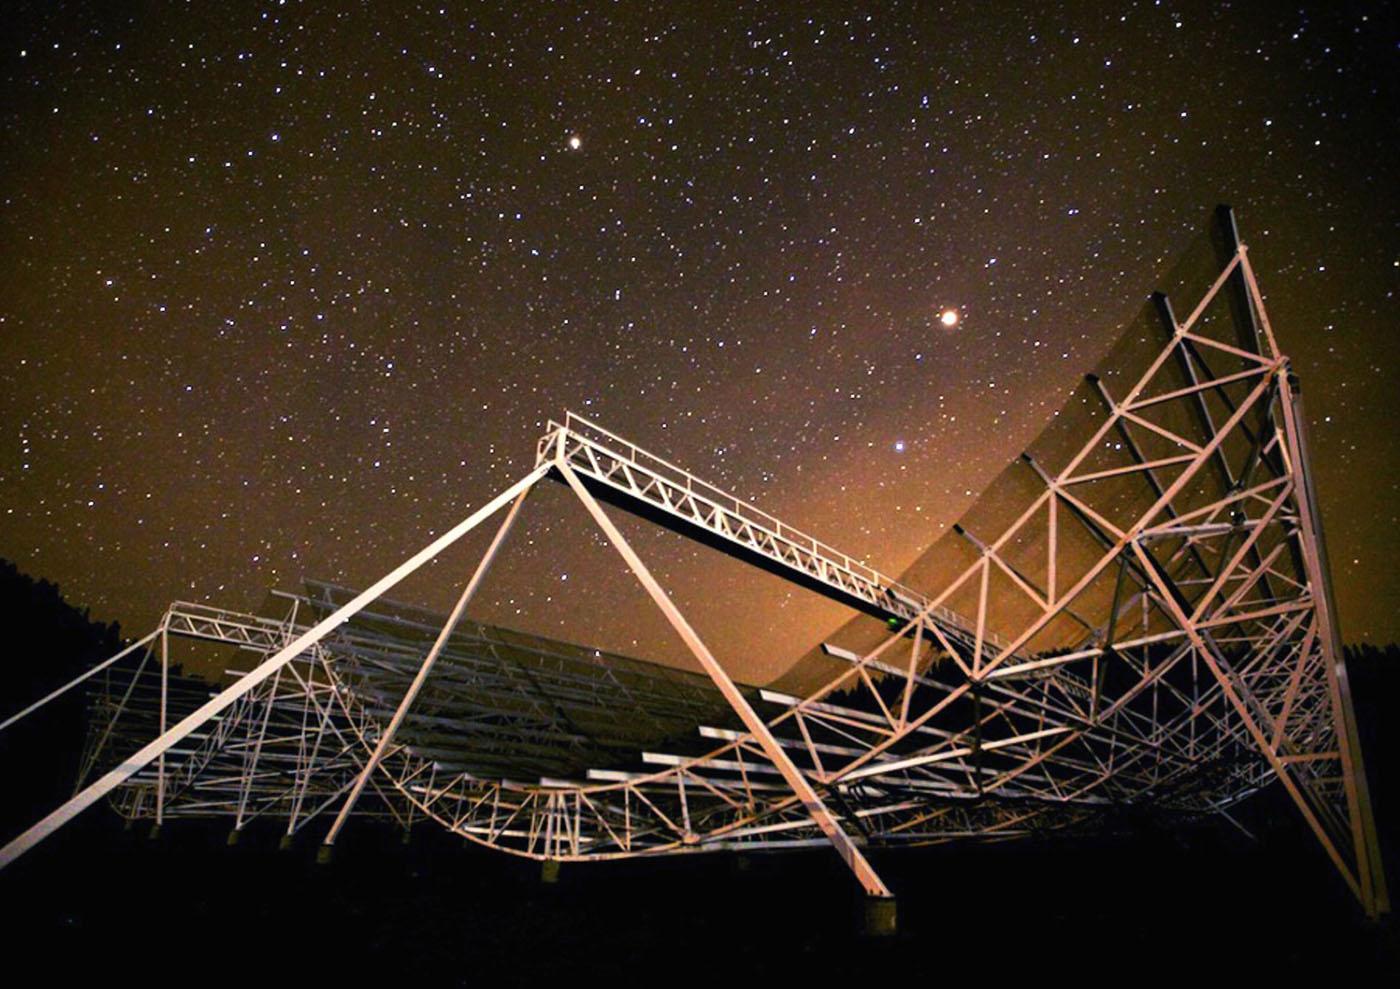 The CHIME Telescope located at the Dominion Radio Astrophysical Observatory (DRAO) in Canada.